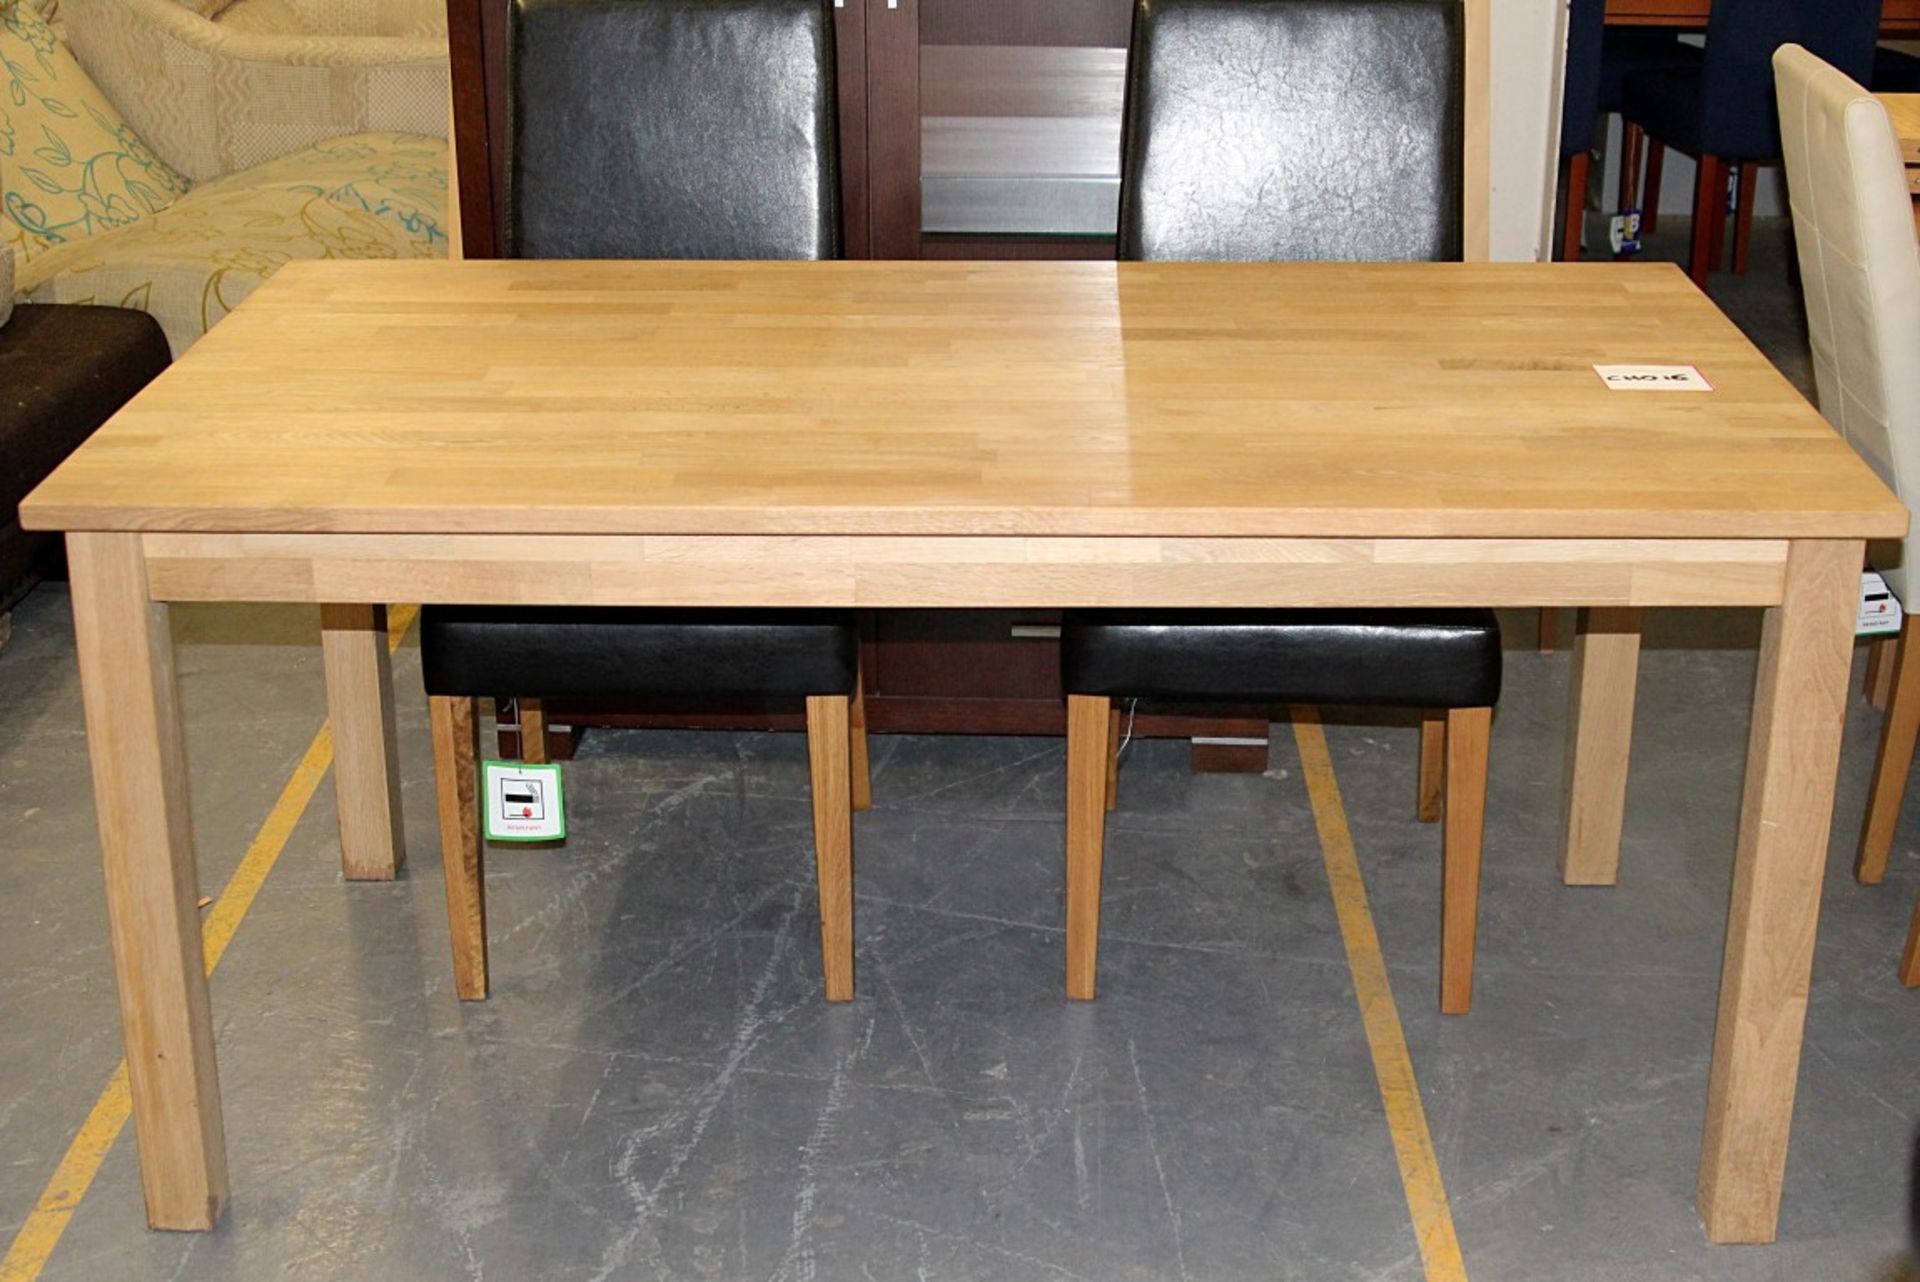 1 x Oak 5ft Table With 4 x Leather Seats - Ref CH016 - Ex Display Stock In Very Good Condition –